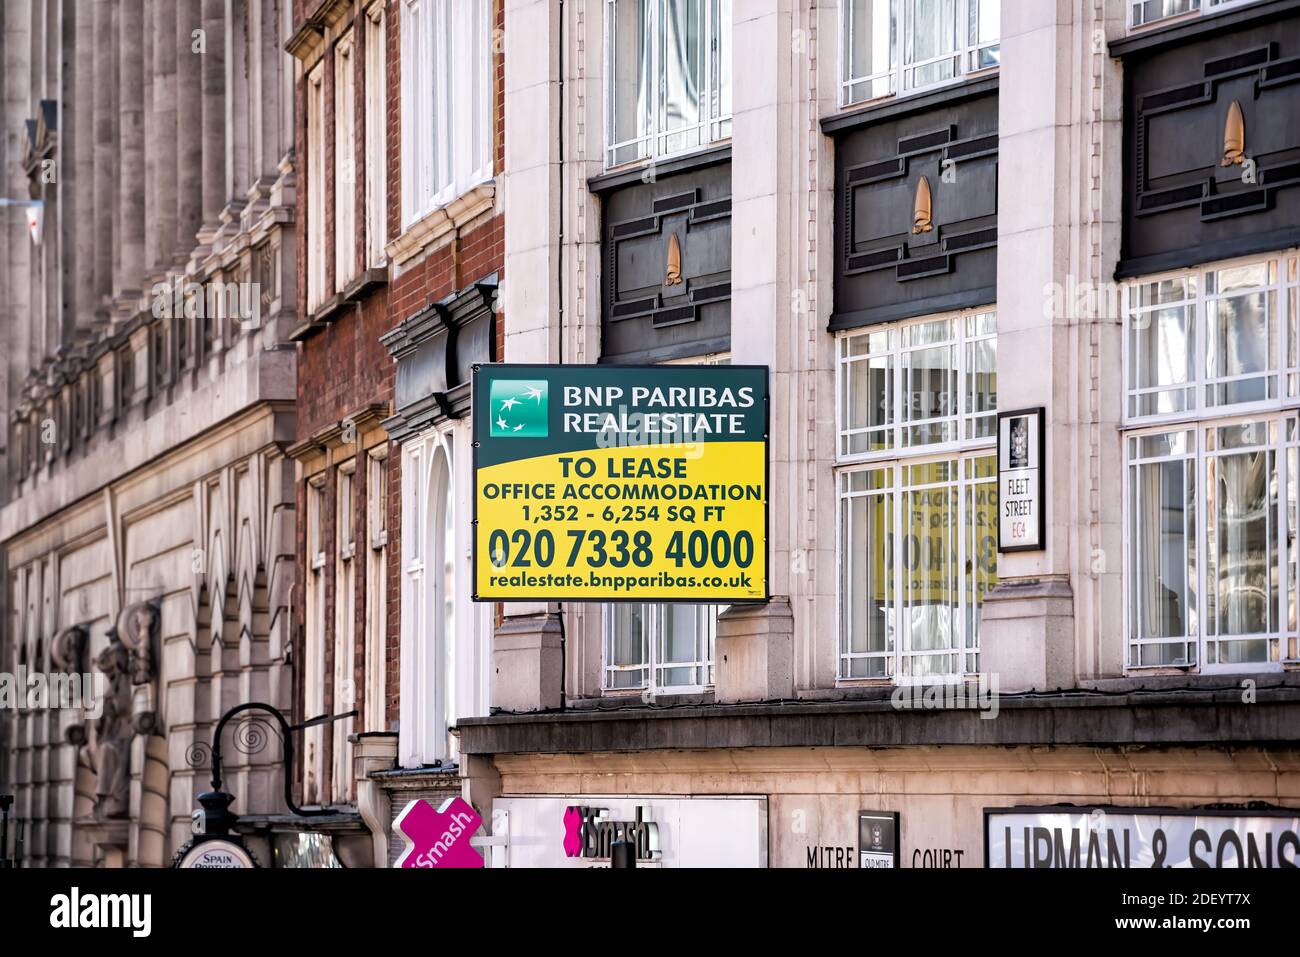 London, UK - June 22, 2018: Fleet street road in center of downtown city with sign for BNP Paribas Real Estate office lease and phone number Stock Photo